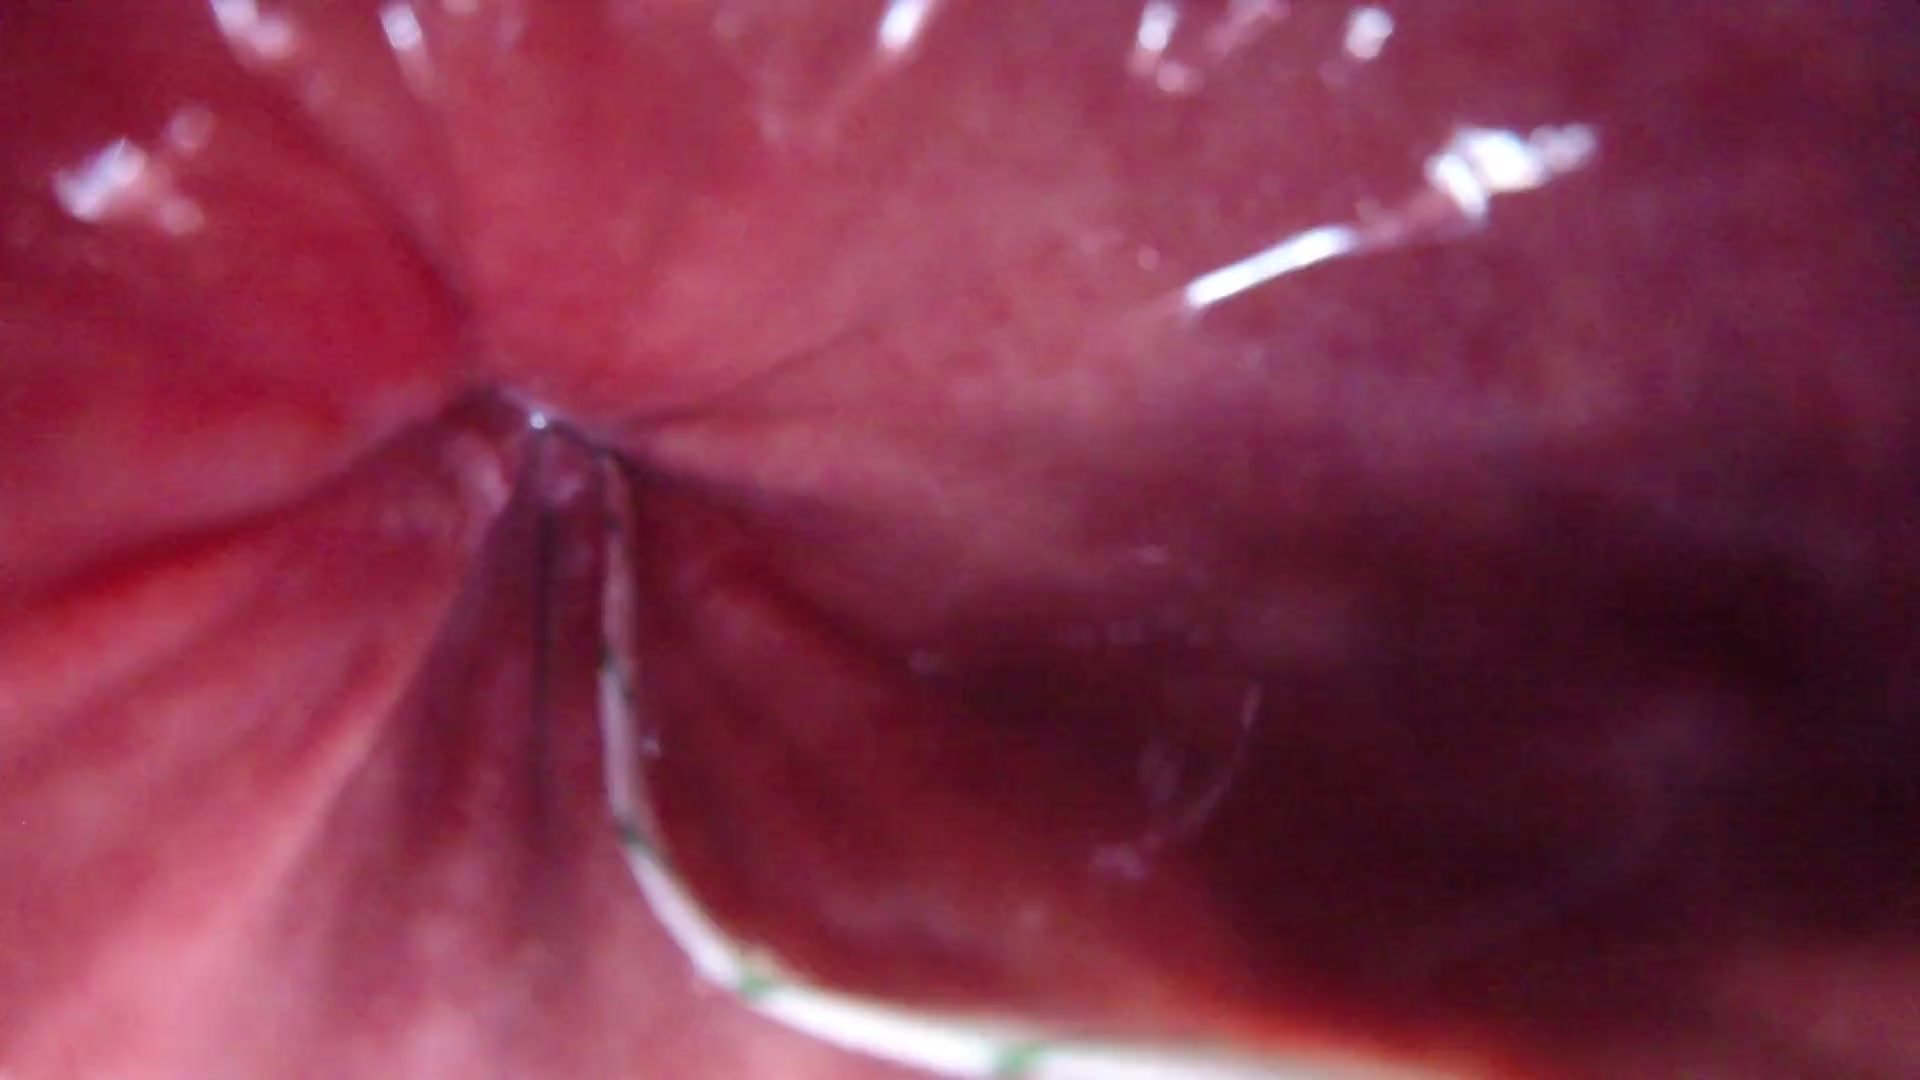 What It's Like To Be Inside Of A Man's Rectum